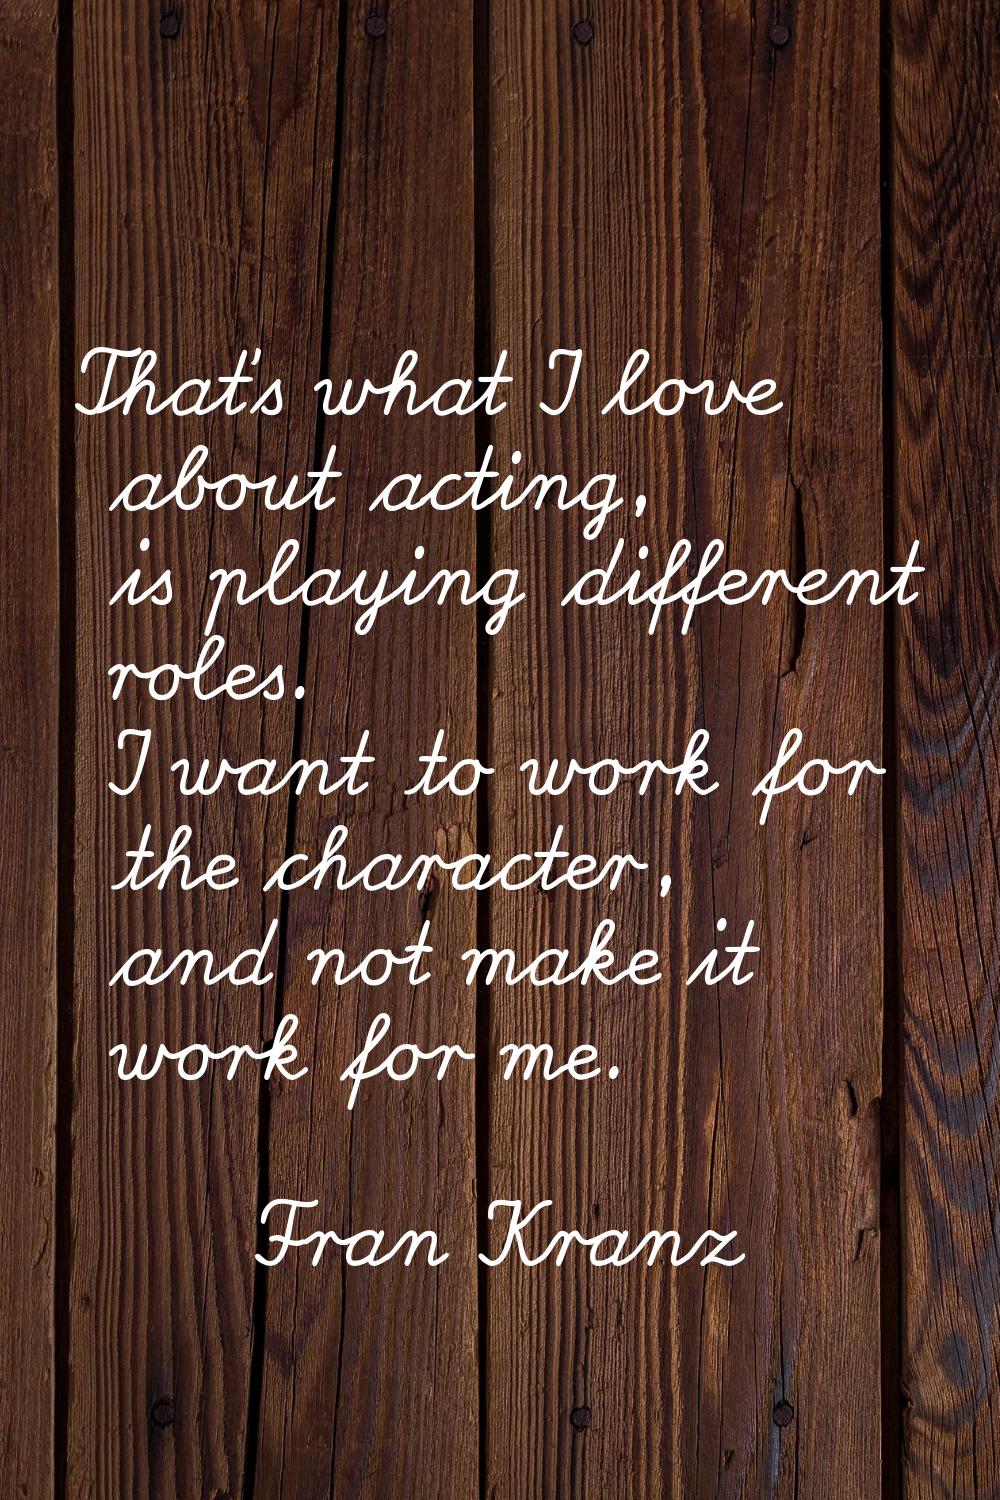 That's what I love about acting, is playing different roles. I want to work for the character, and 